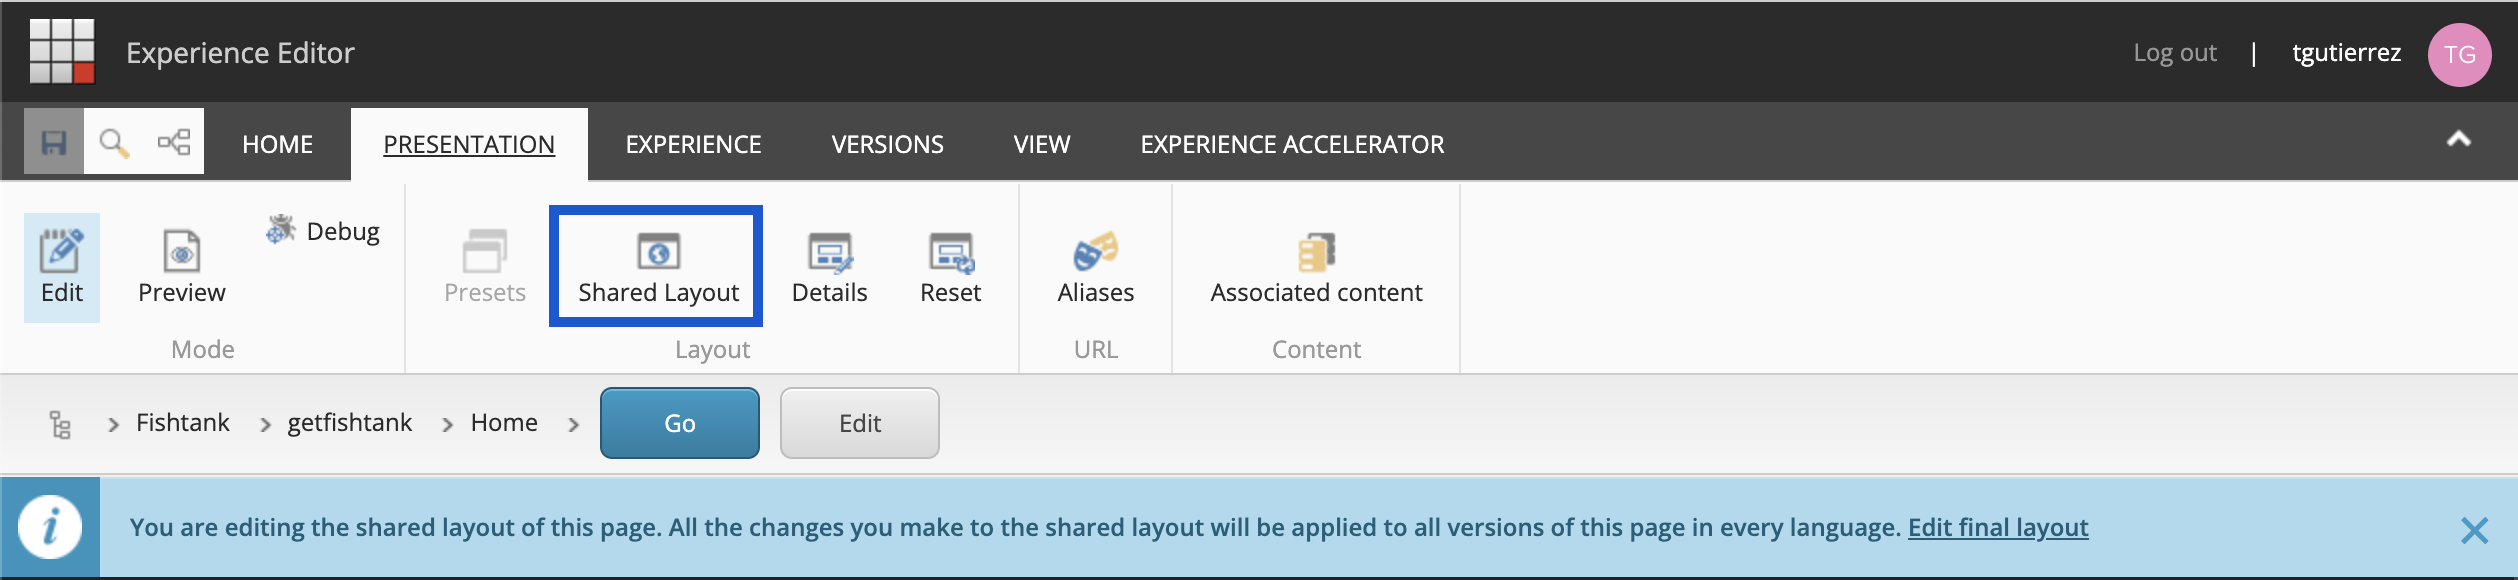 Sitecore Experience Editor Shared Layout